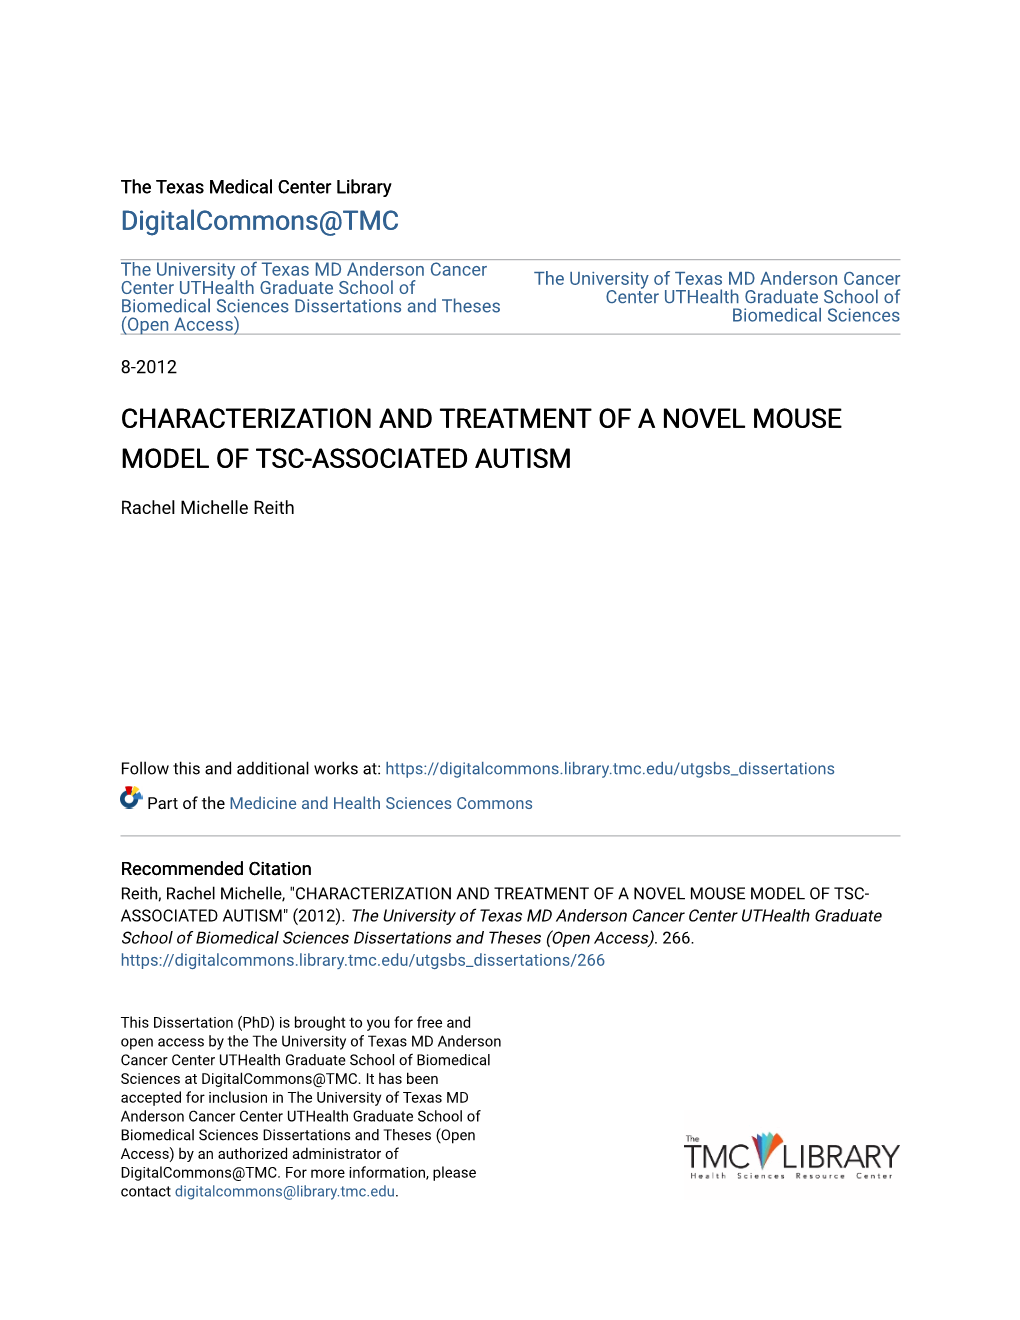 Characterization and Treatment of a Novel Mouse Model of Tsc-Associated Autism